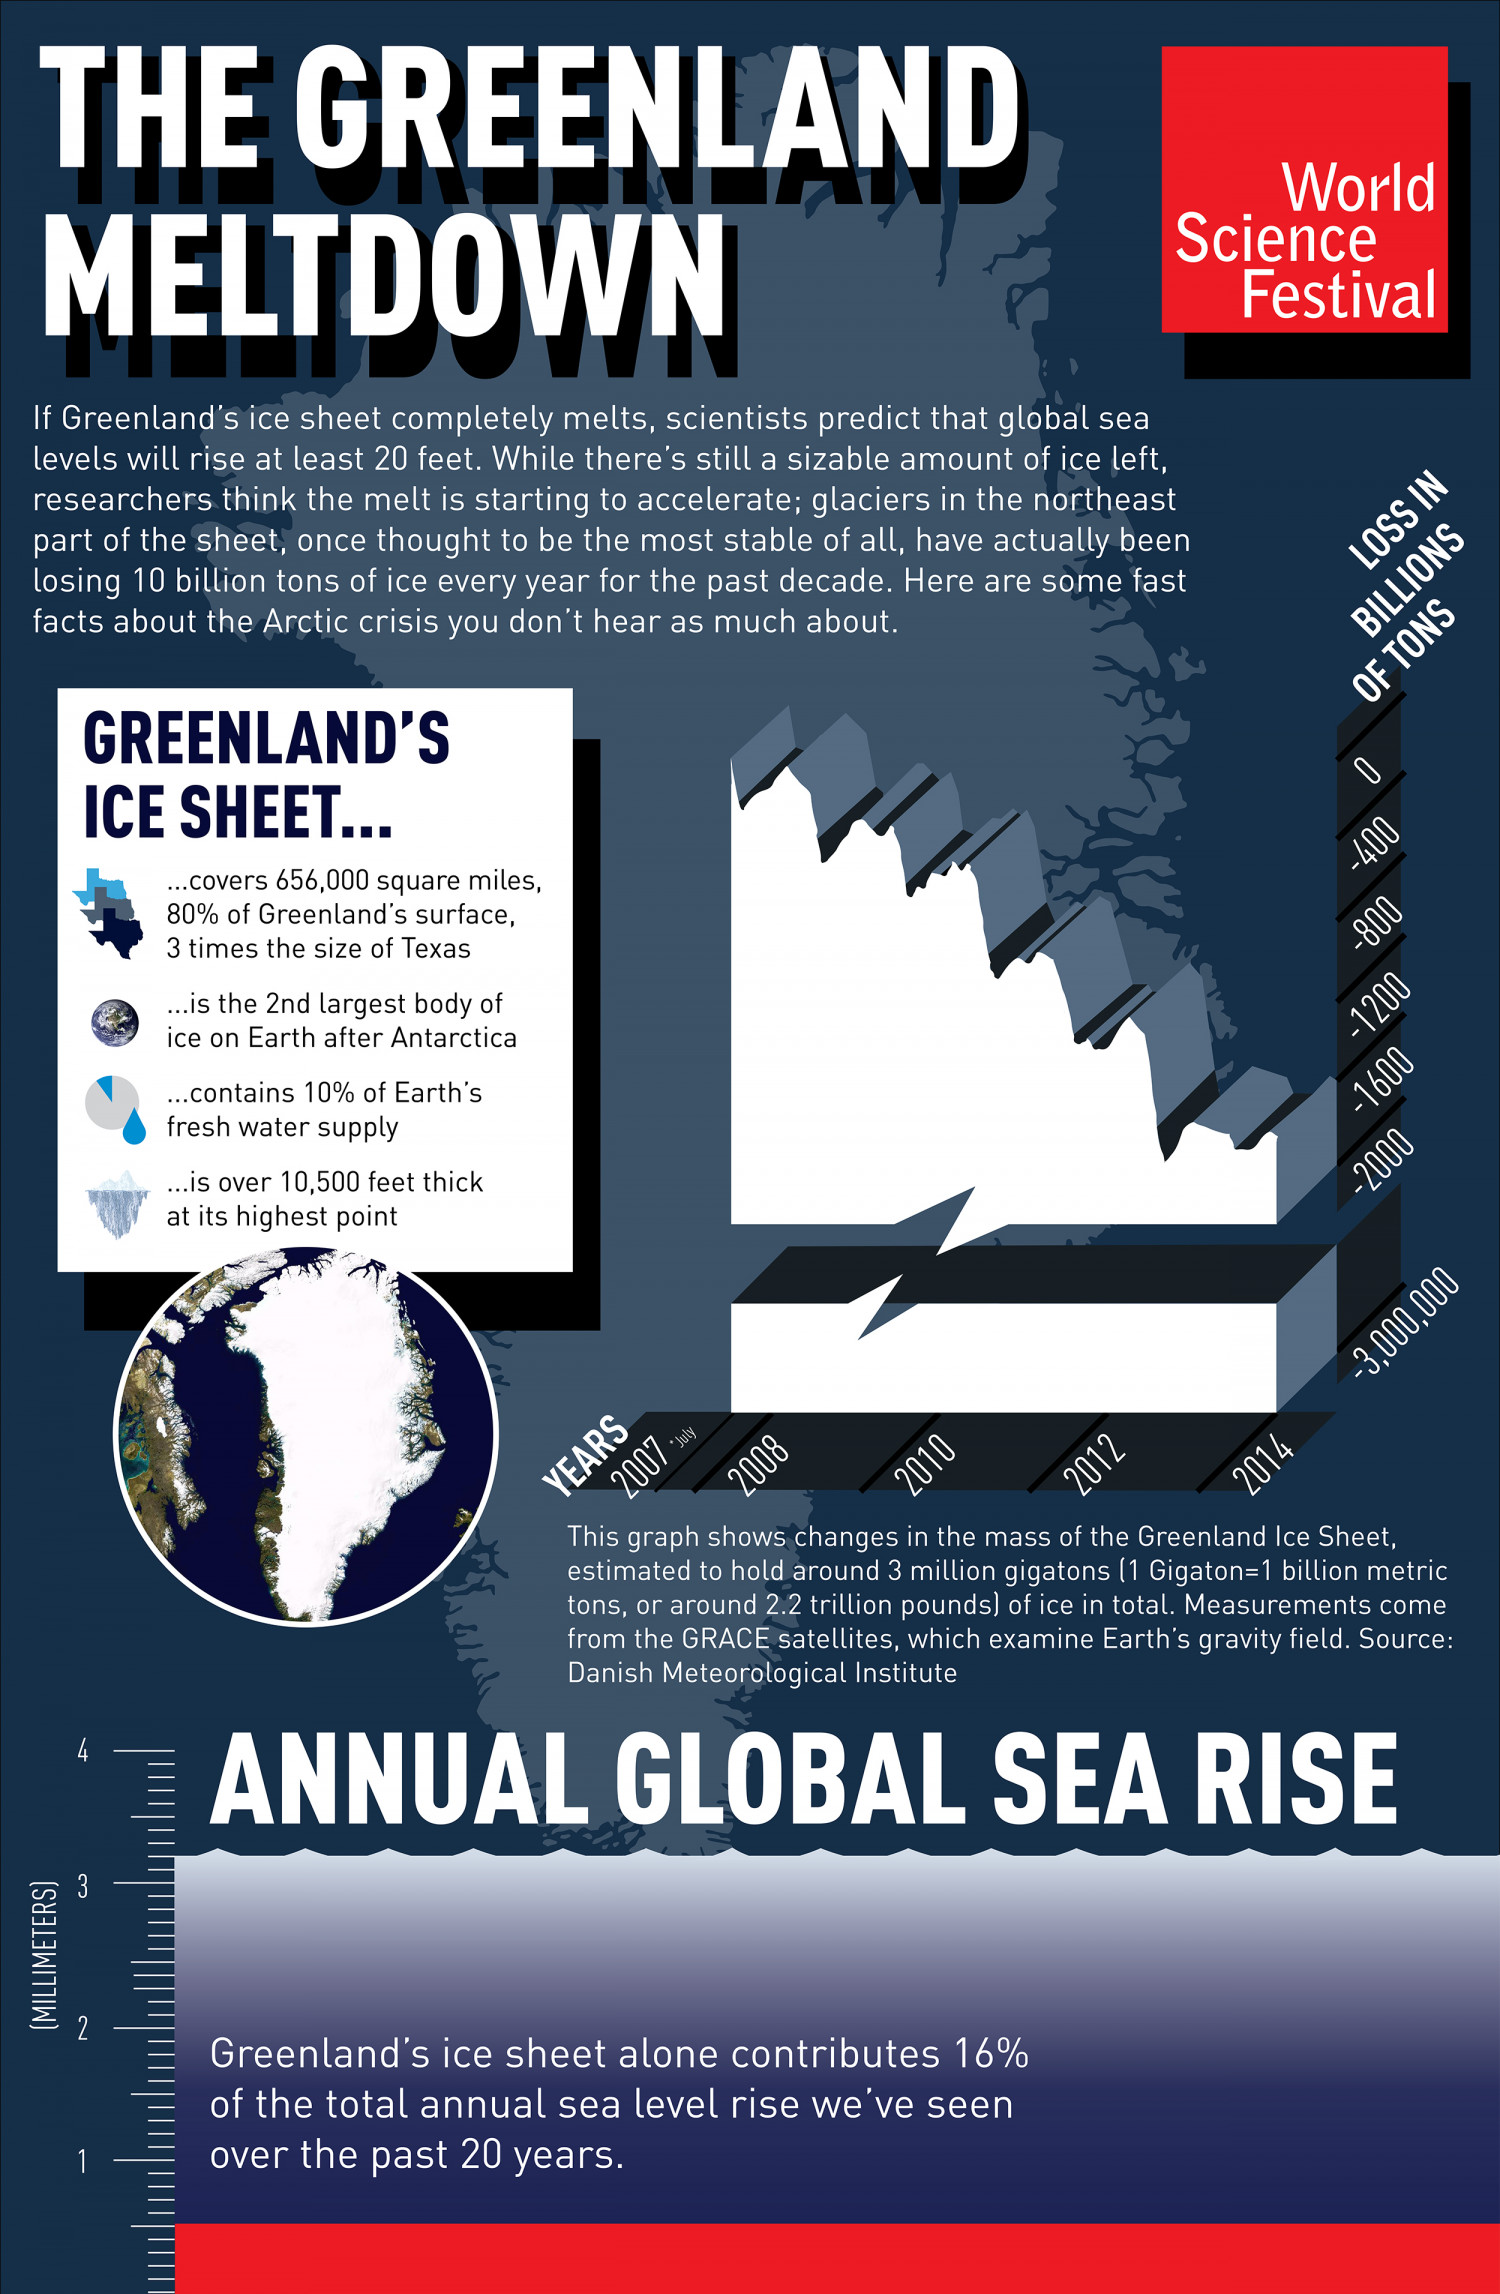 The Other Arctic Crisis: Greenland’s Meltdown Infographic